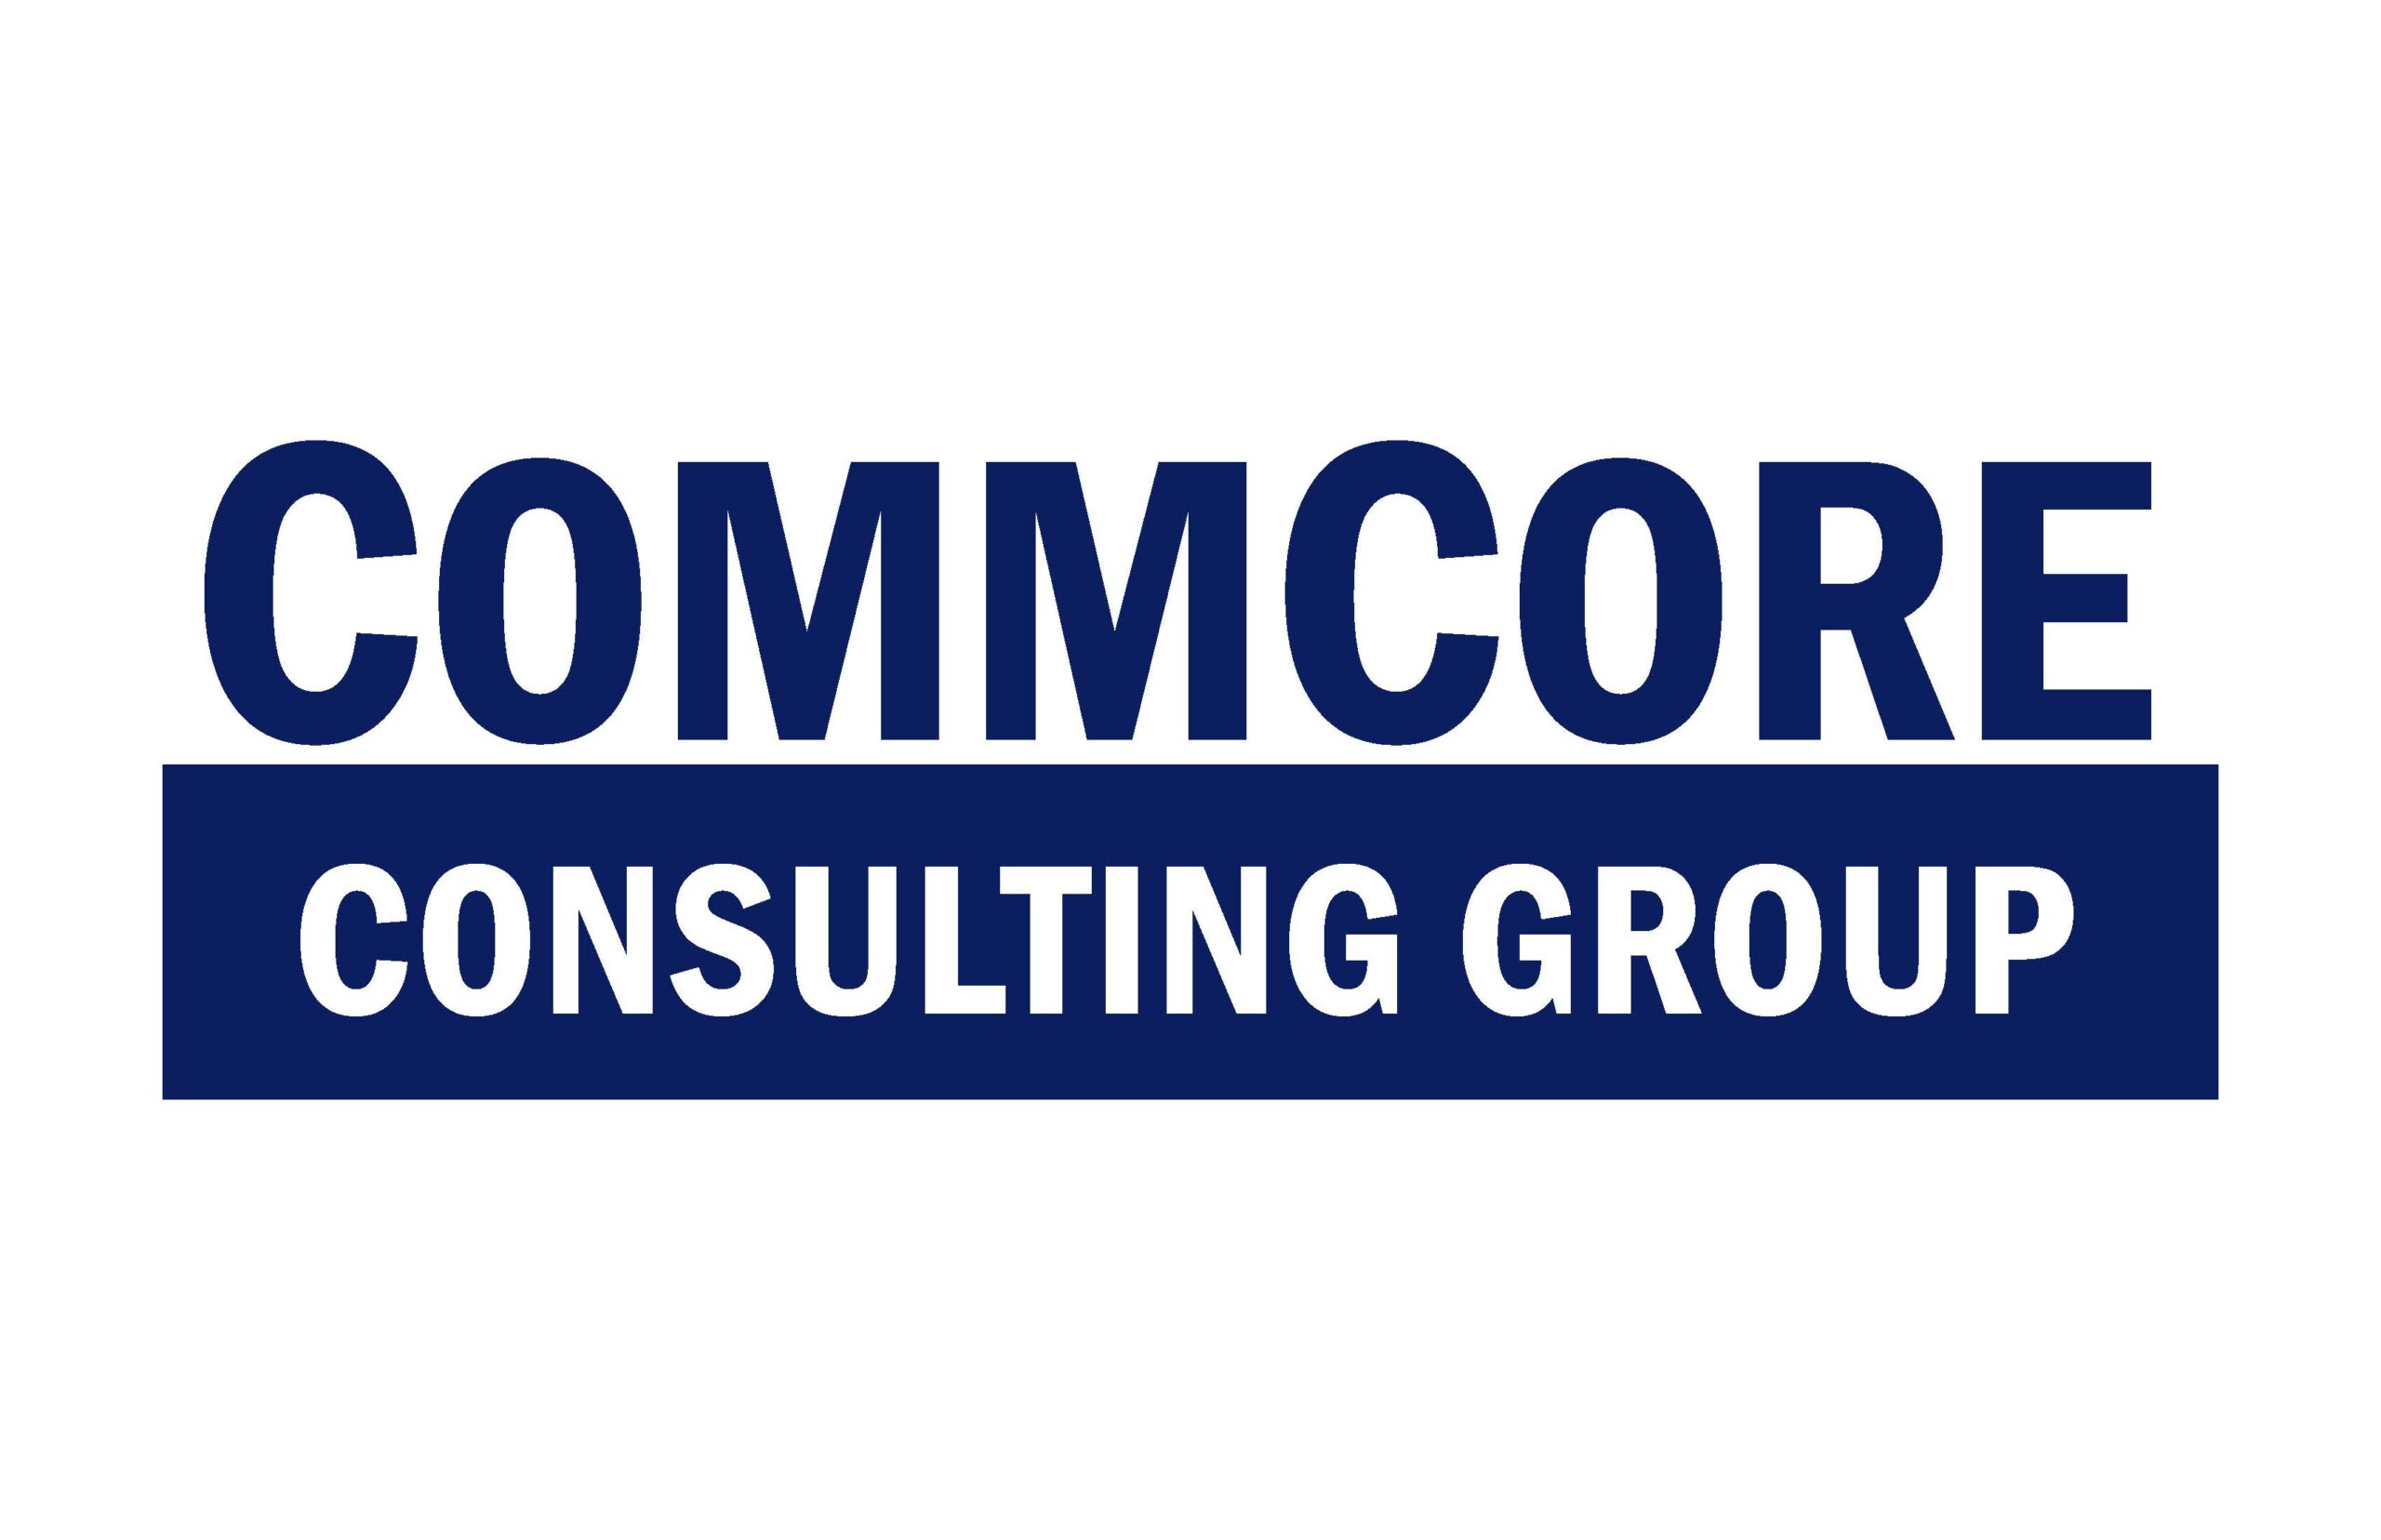 Commcore consulting group Logo